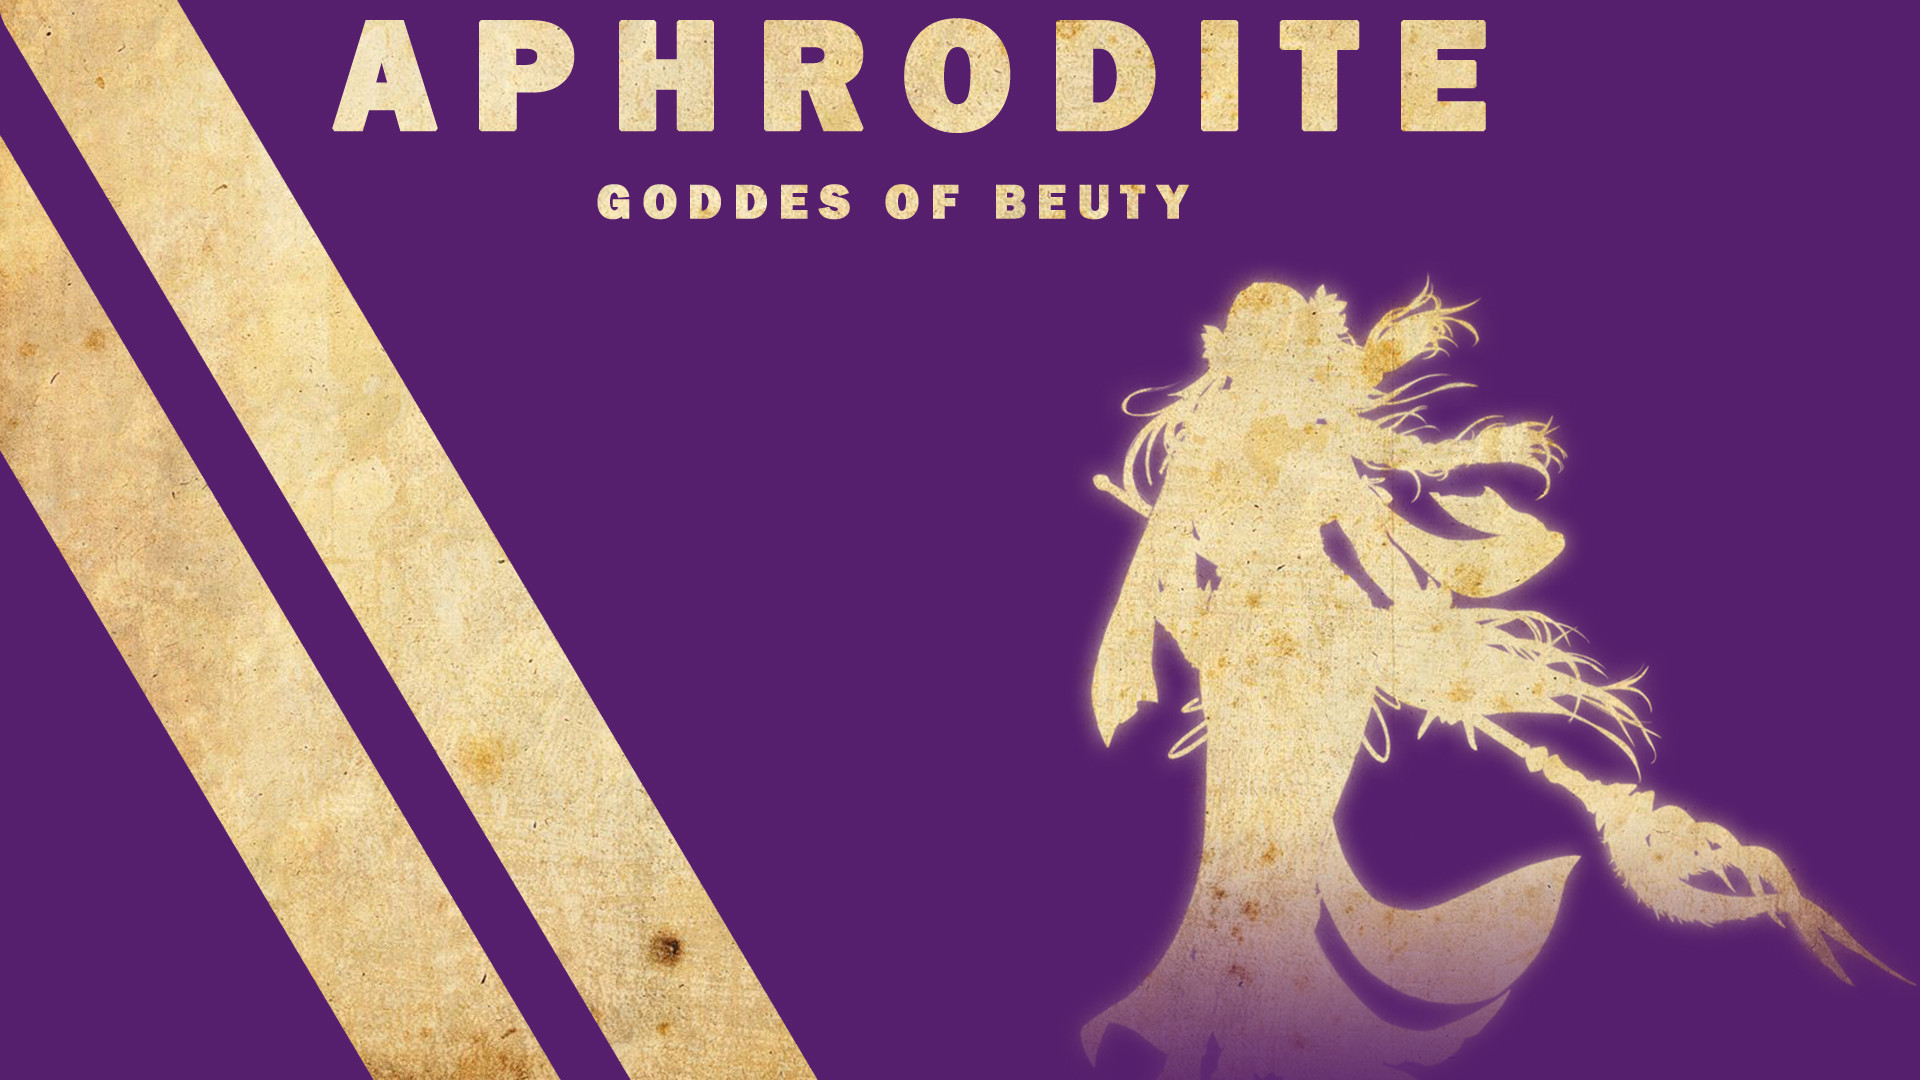 1920x1080 Aphrodite Goddes of Beauty by iPereirator Aphrodite Goddes of Beauty by  iPereirator